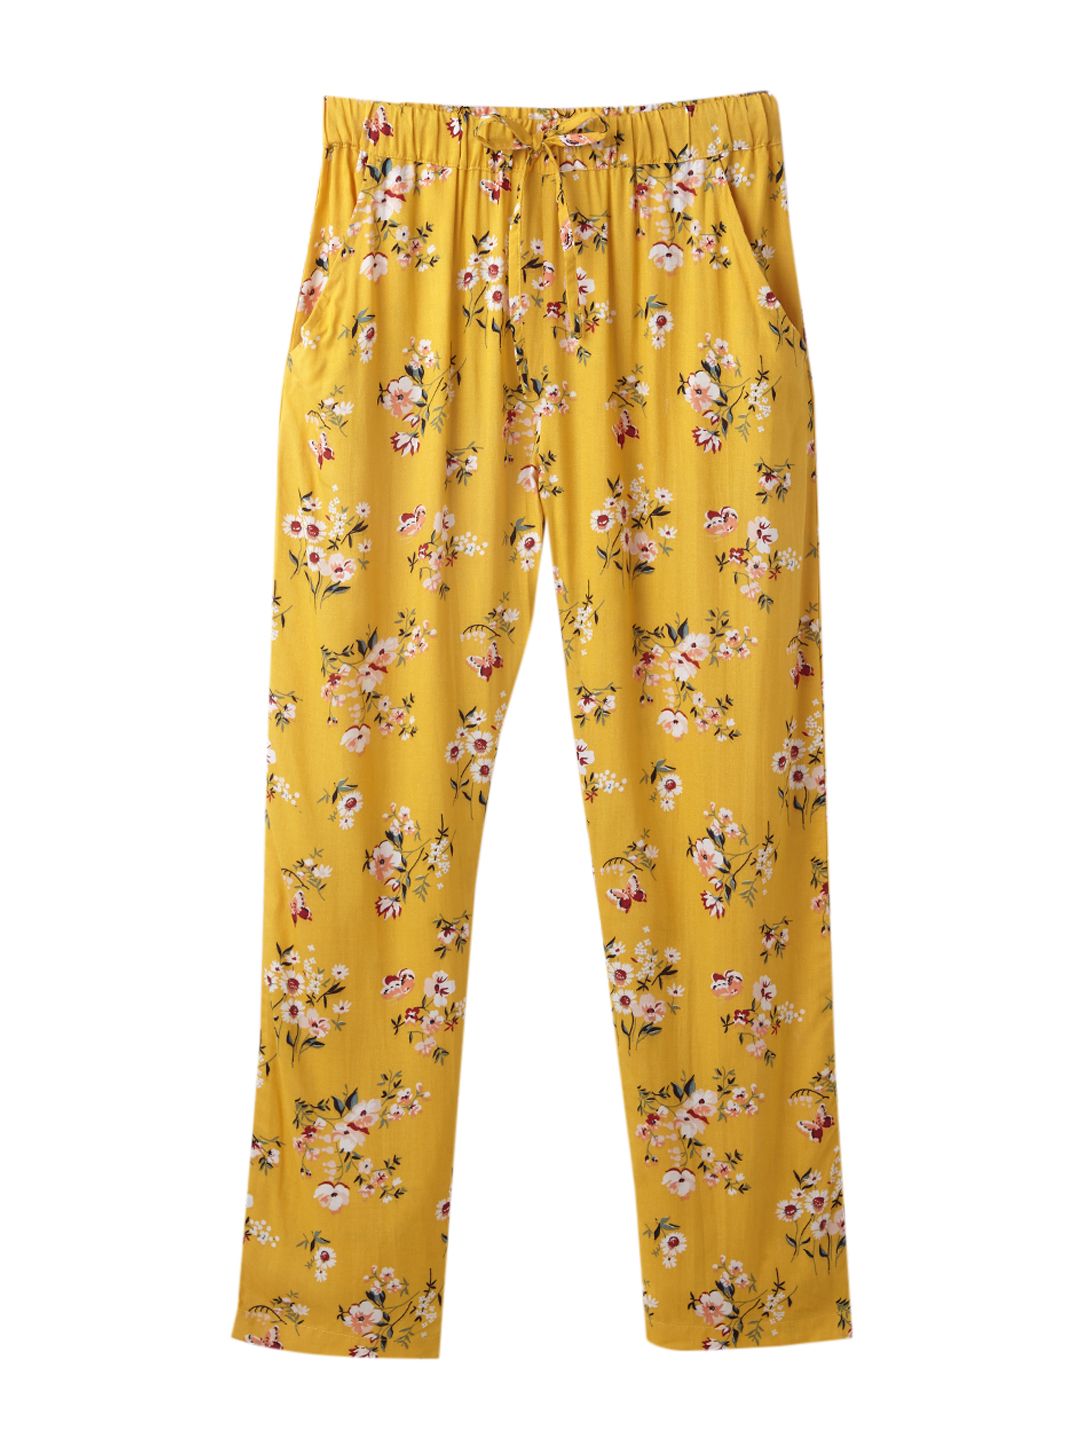 palazzo pants for girls for 4 - 12 years